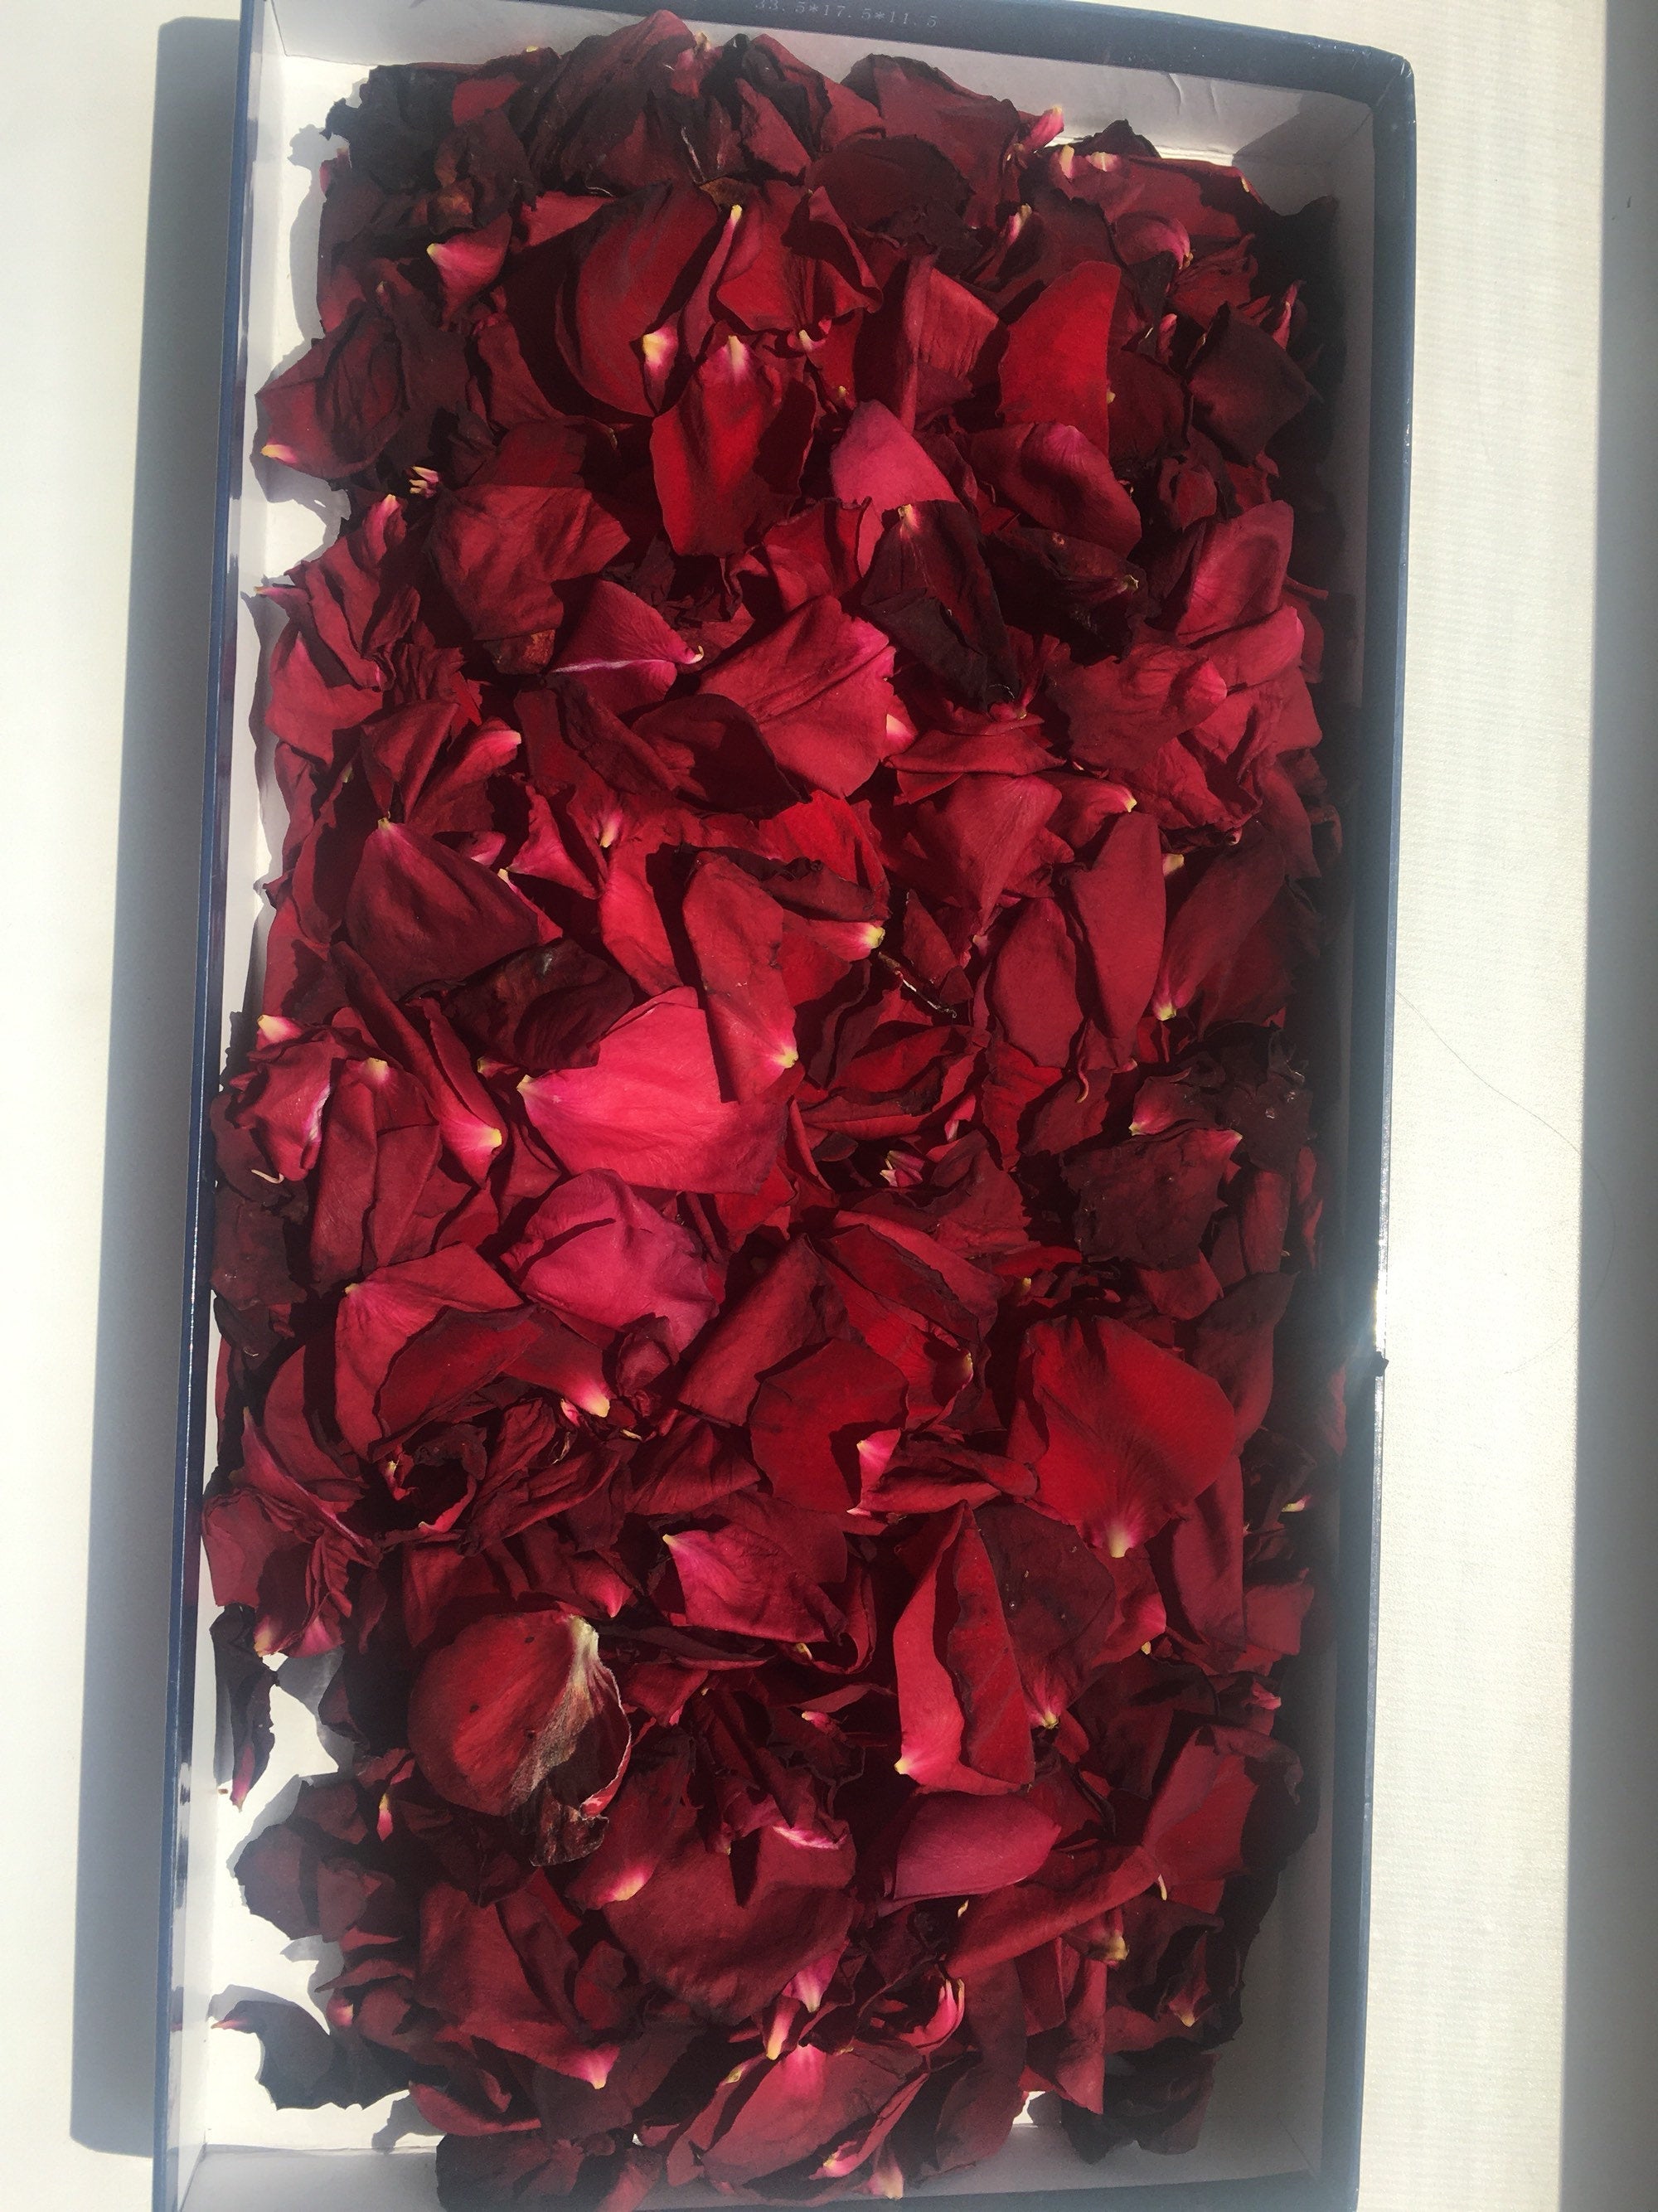 1-10 Cups of Red rose petals, High Quality, Natural, Organic, Biodegradable, Craft, Edible, Confetti, Wedding toss, Wedding confetti, Soap